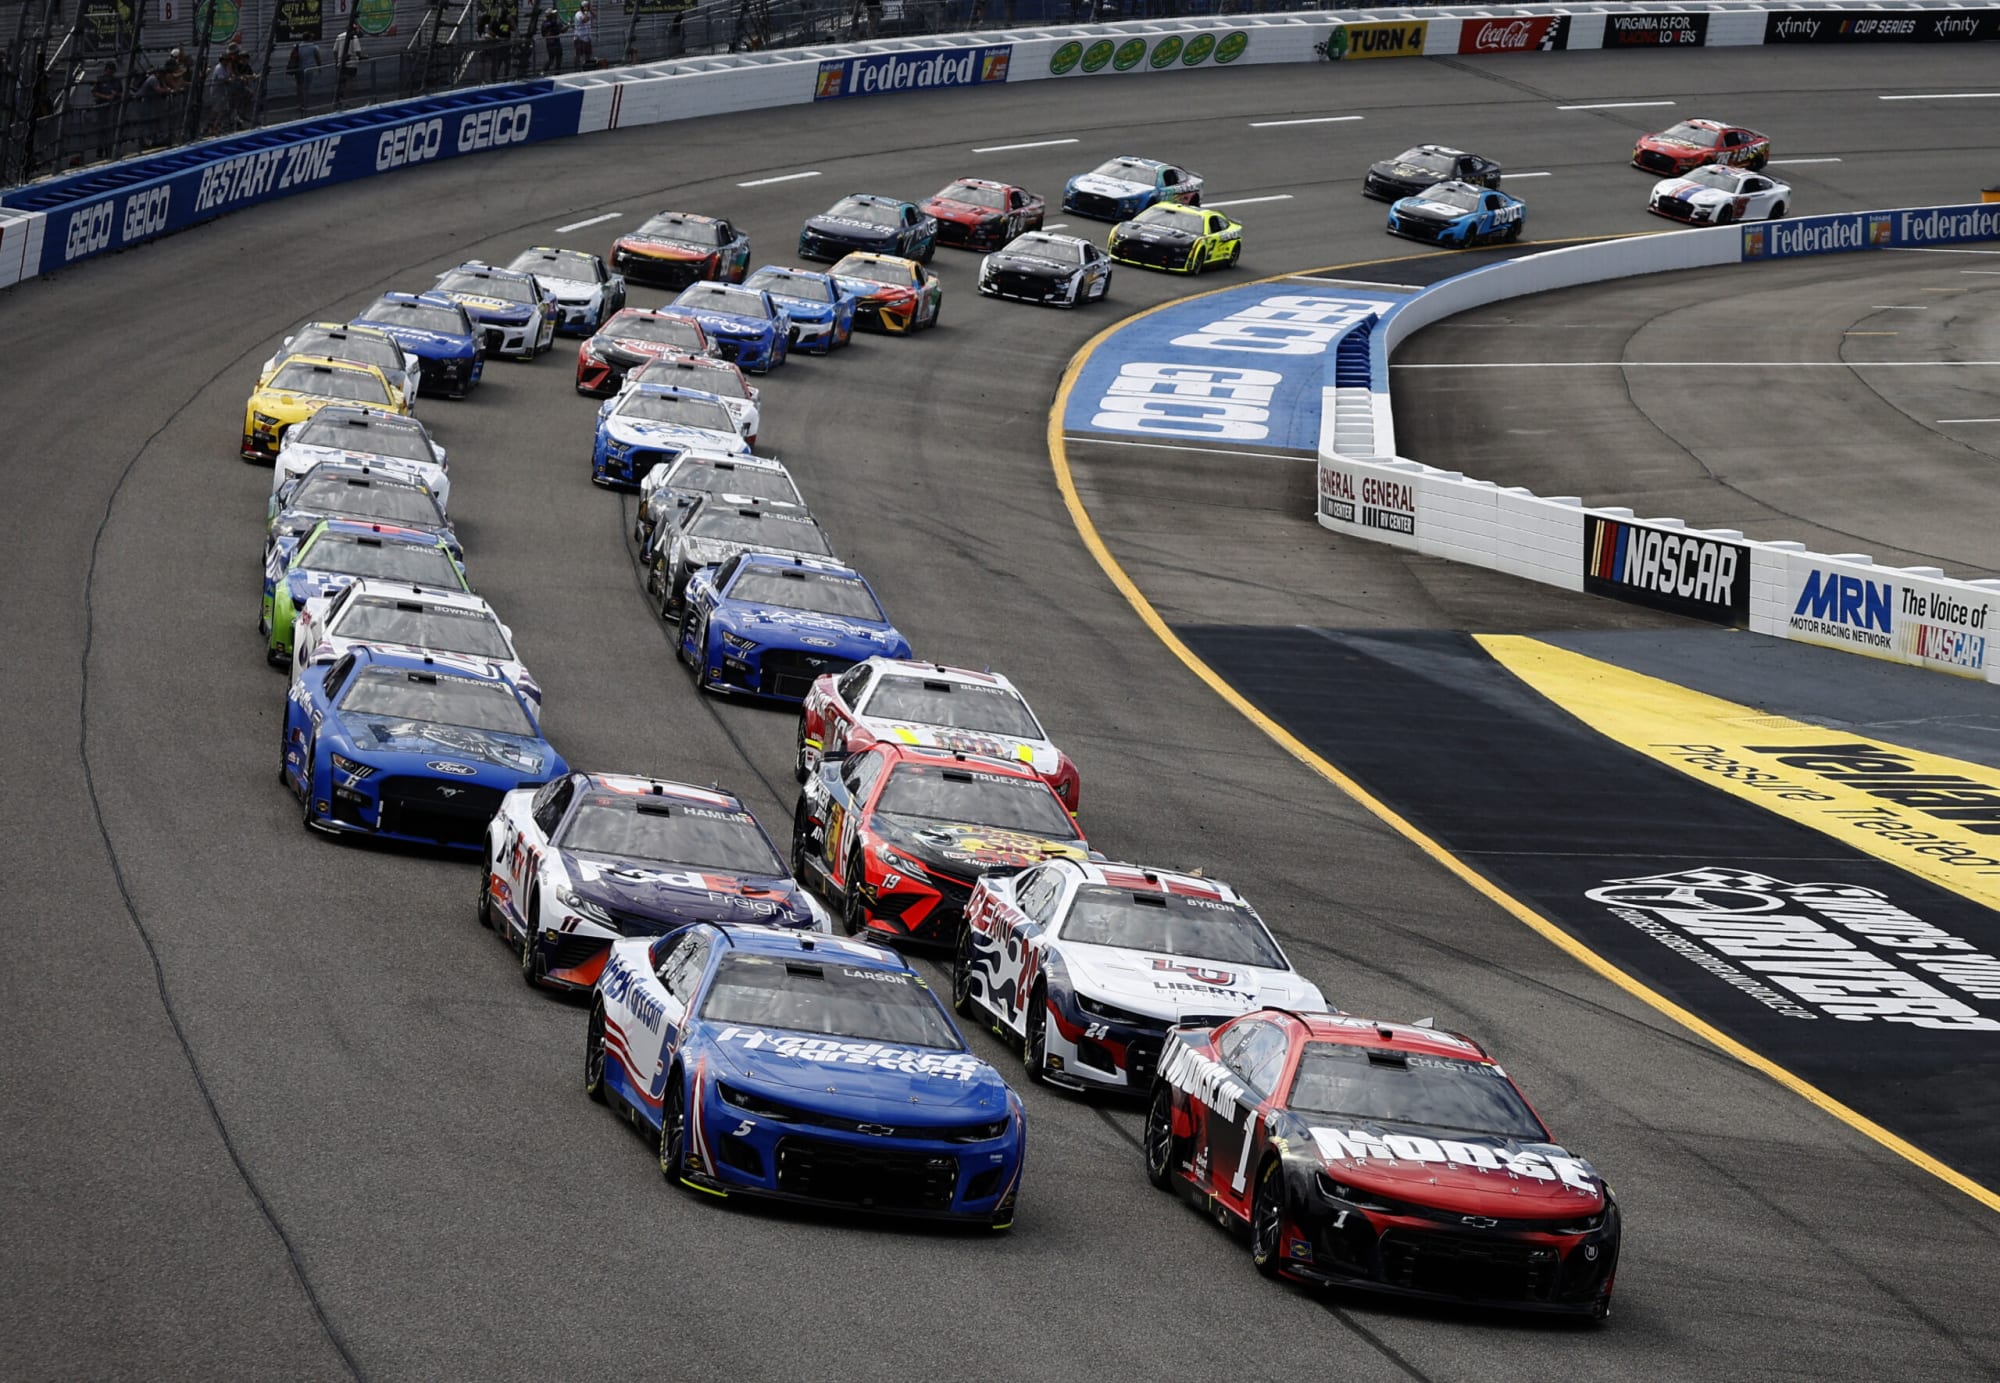 USA Network to Broadcast Cook Out 400 NASCAR Cup Series Race instead of NBC 